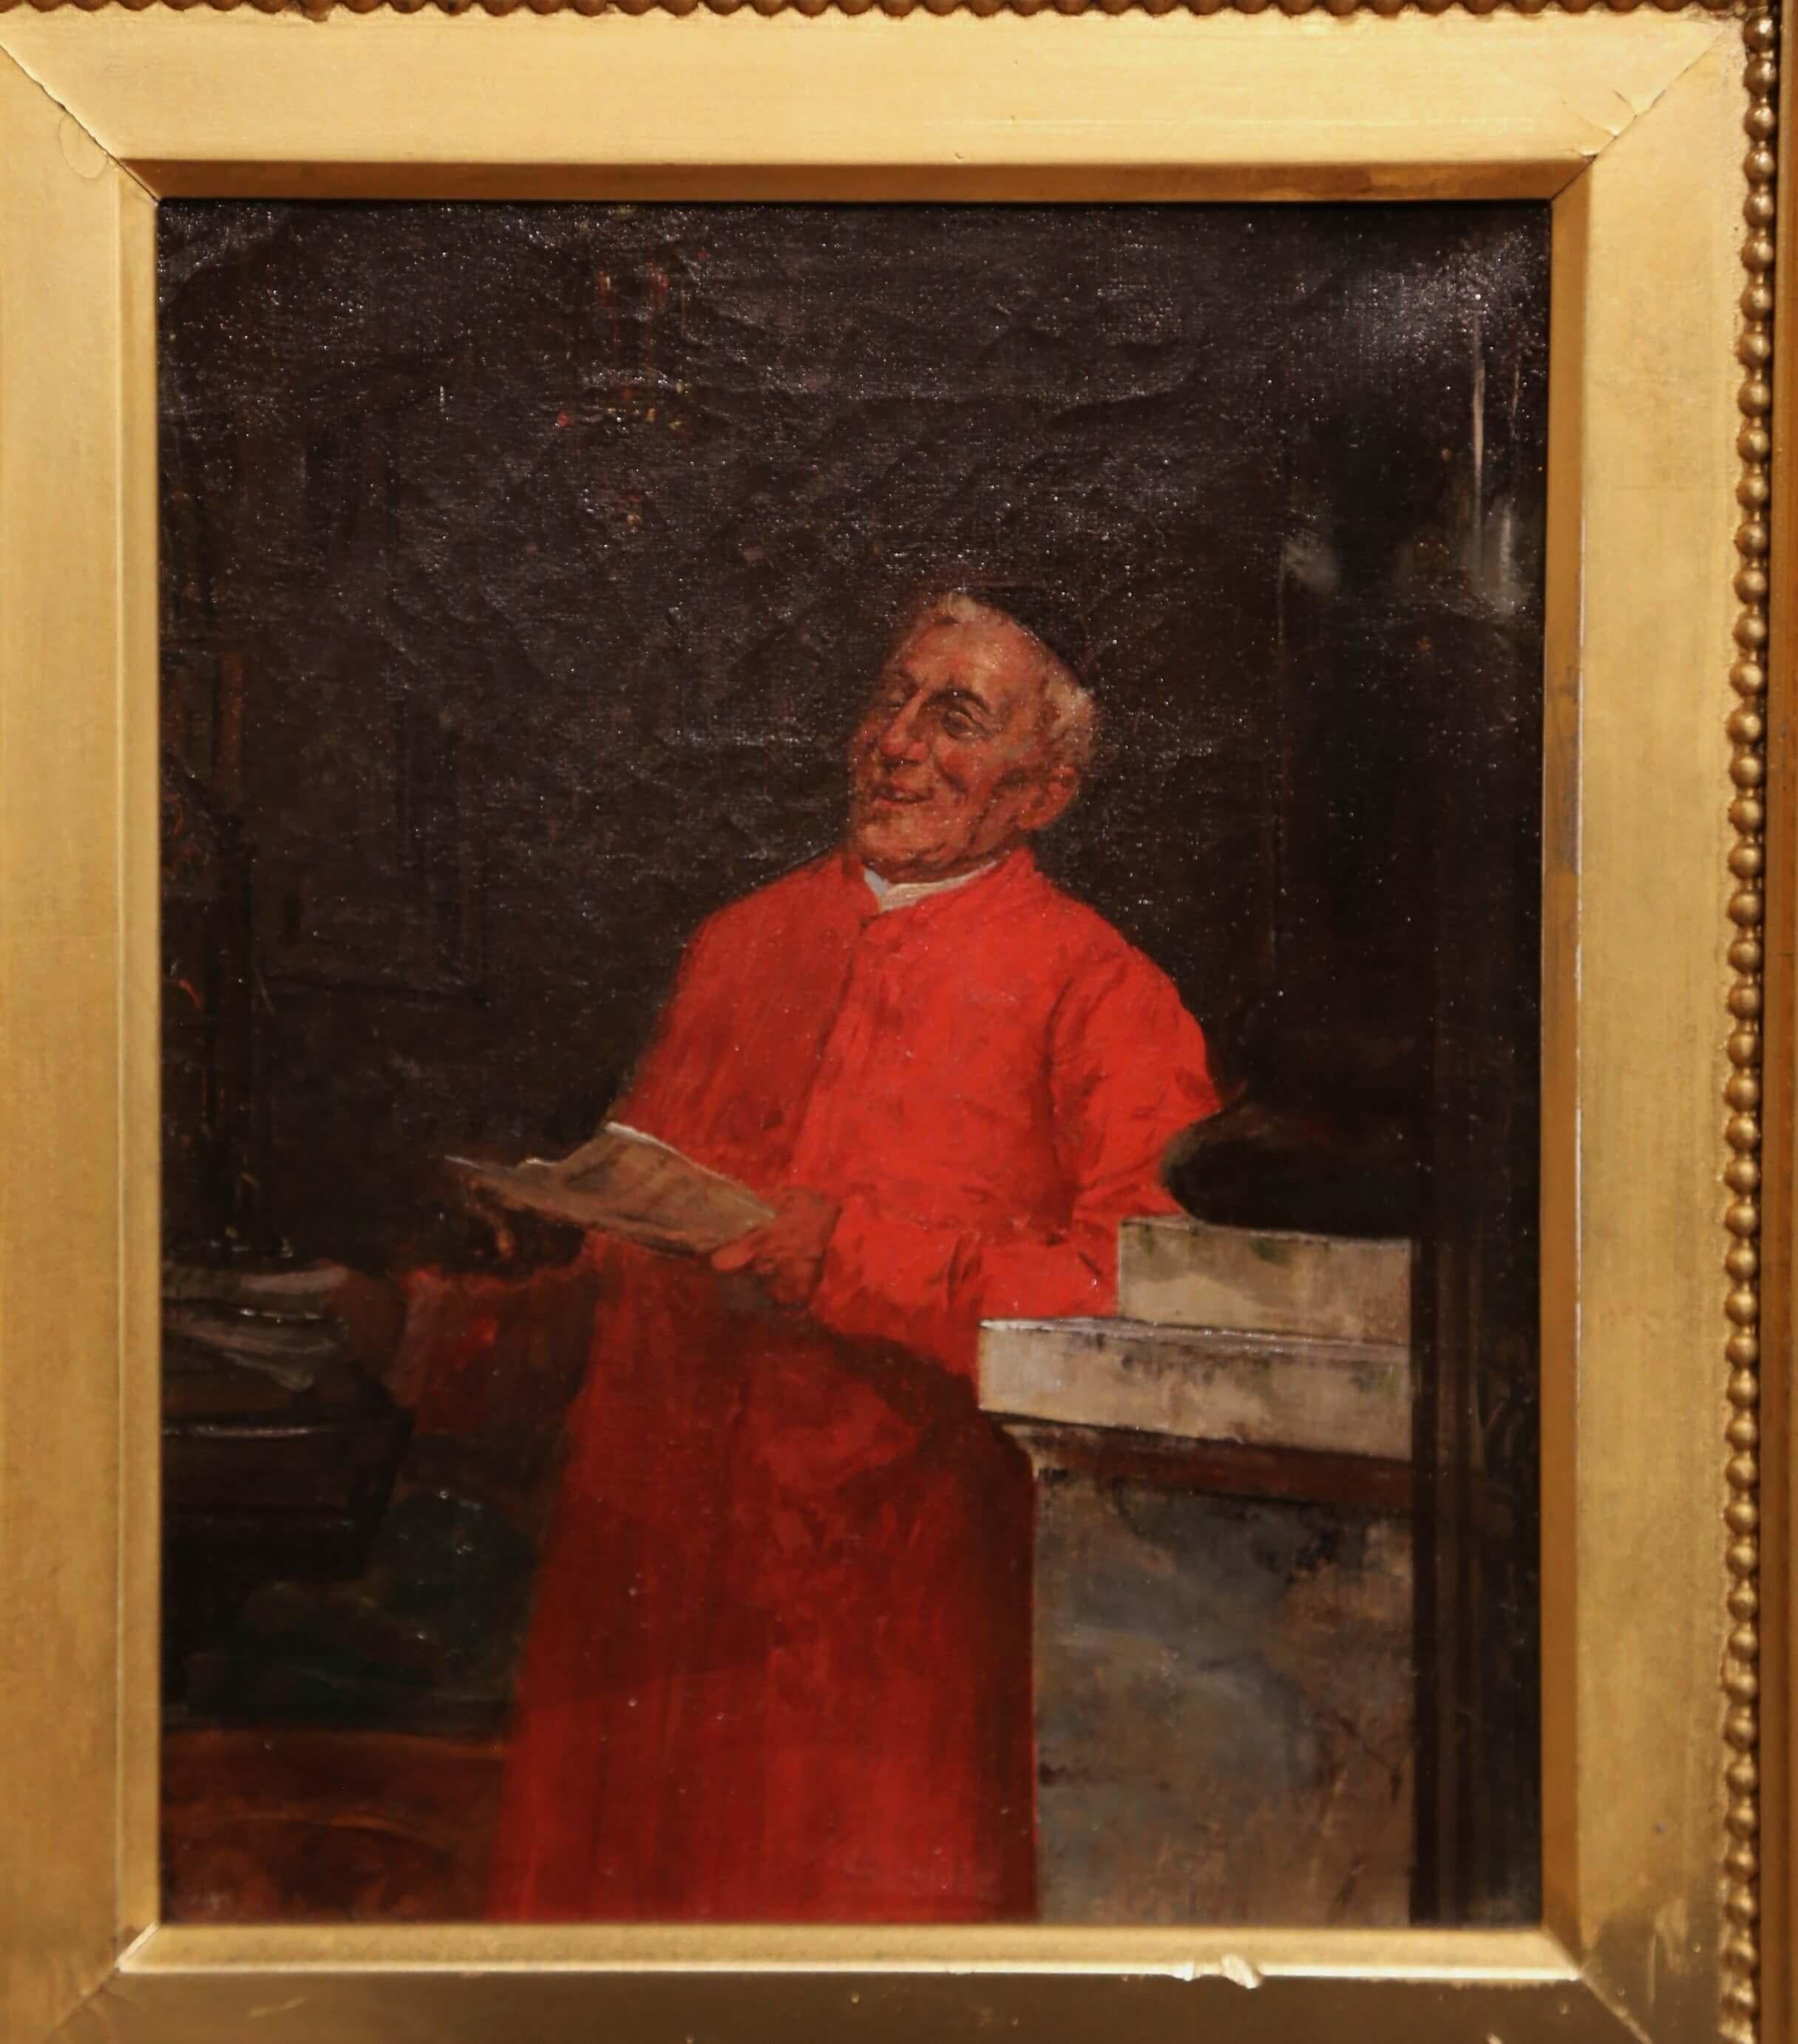 This antique portrait painting was created in France, circa 1850. The rectangular artwork is set inside a carved giltwood frame and depicts a French cardinal dressed in a traditional red cassock. His expression is jovial, he smiles and appears to be